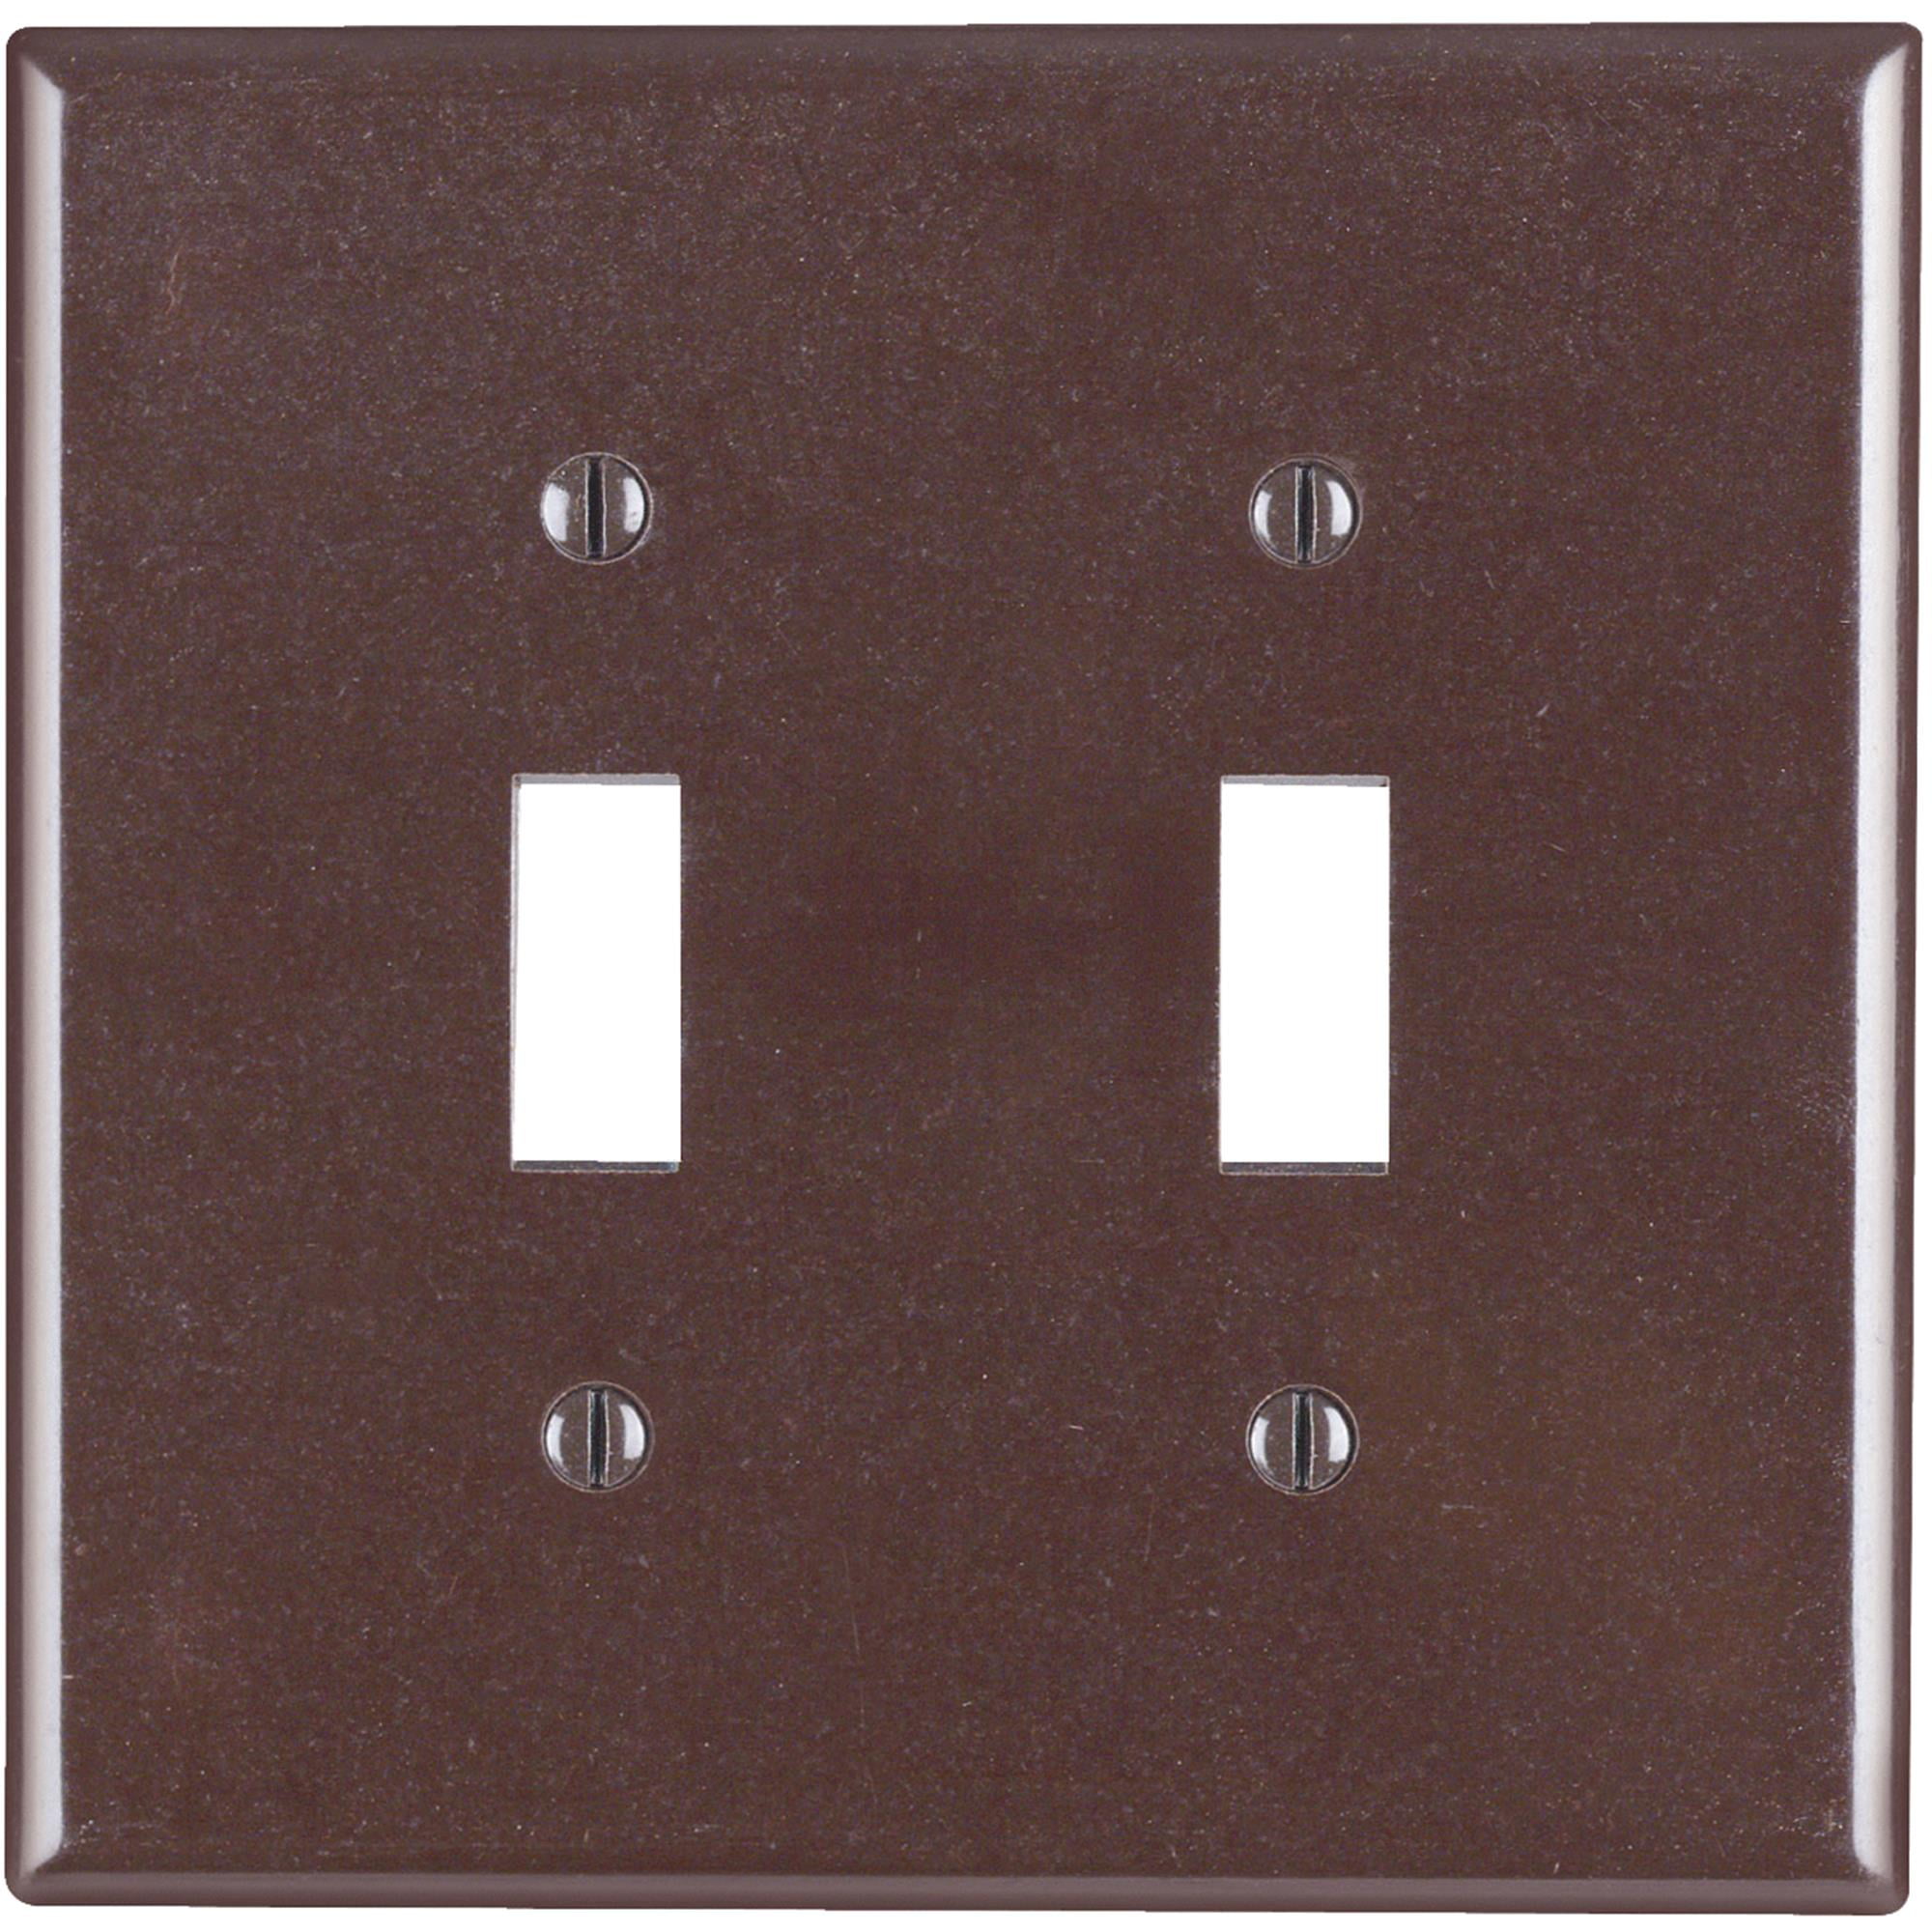 Leviton CHERRY 2-Gang Toggle Switch Cover Wallplate Switchplate 89209-CHR 